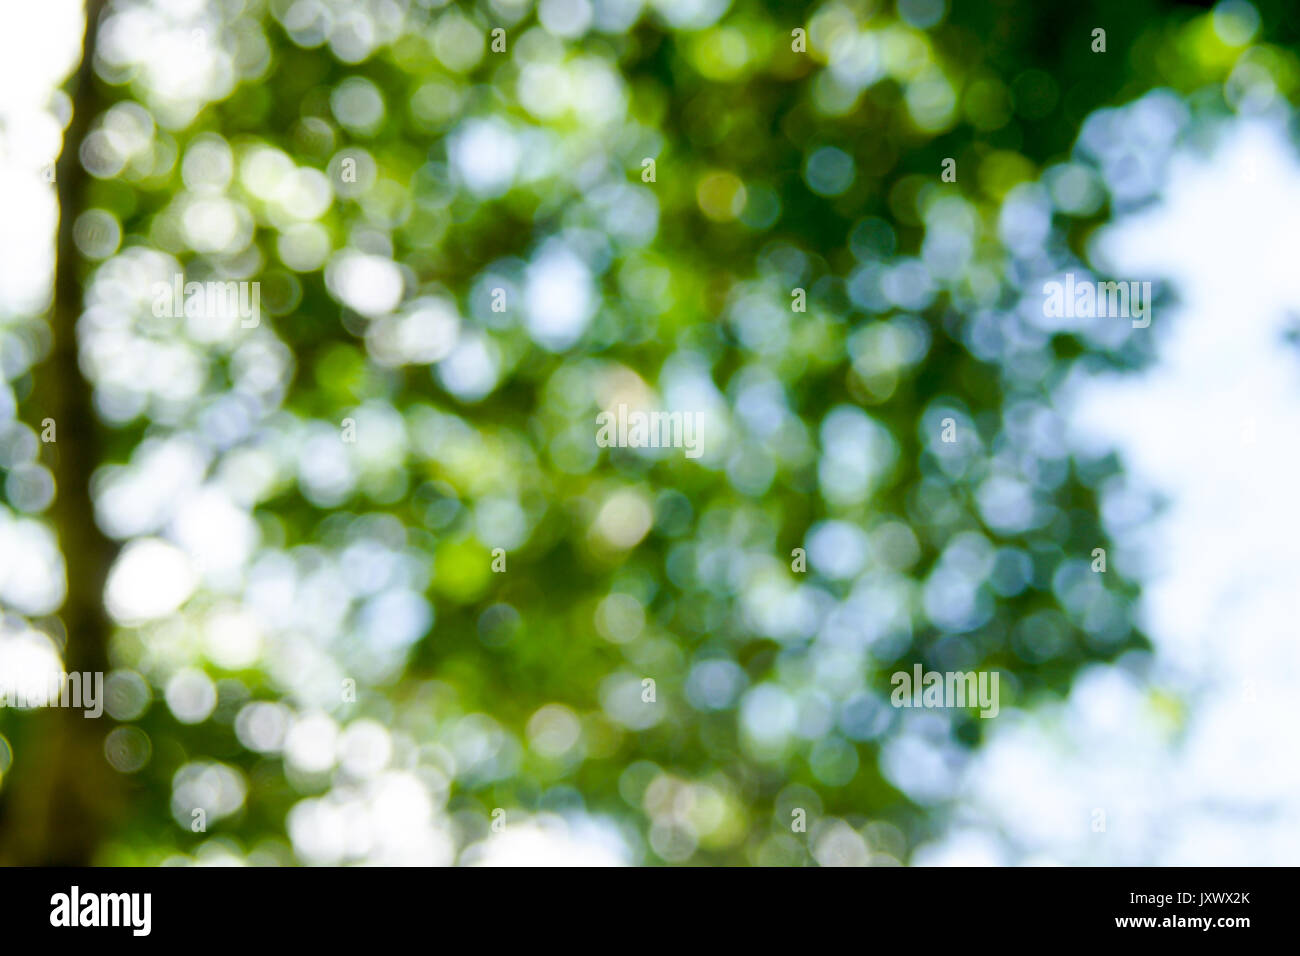 Abstact defocus bokeh light background made of forest style,Beautiful background image. Stock Photo